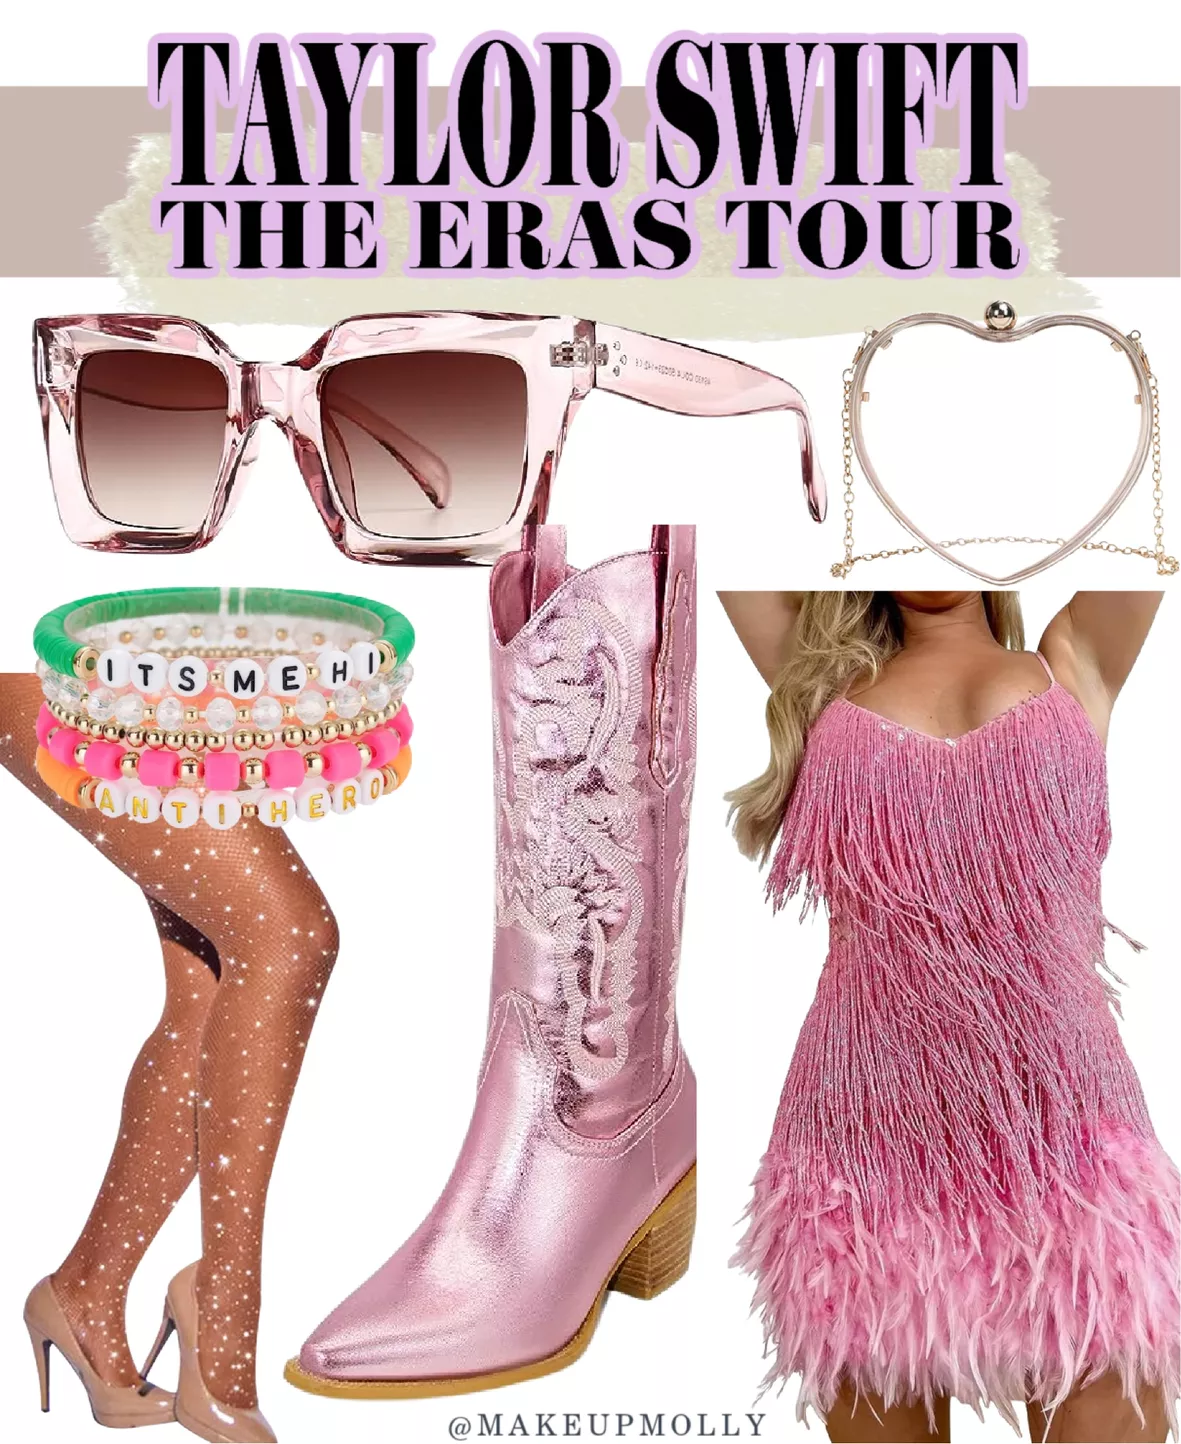 Taylor Swift Concert Outfit Ideas For the Eras Tour